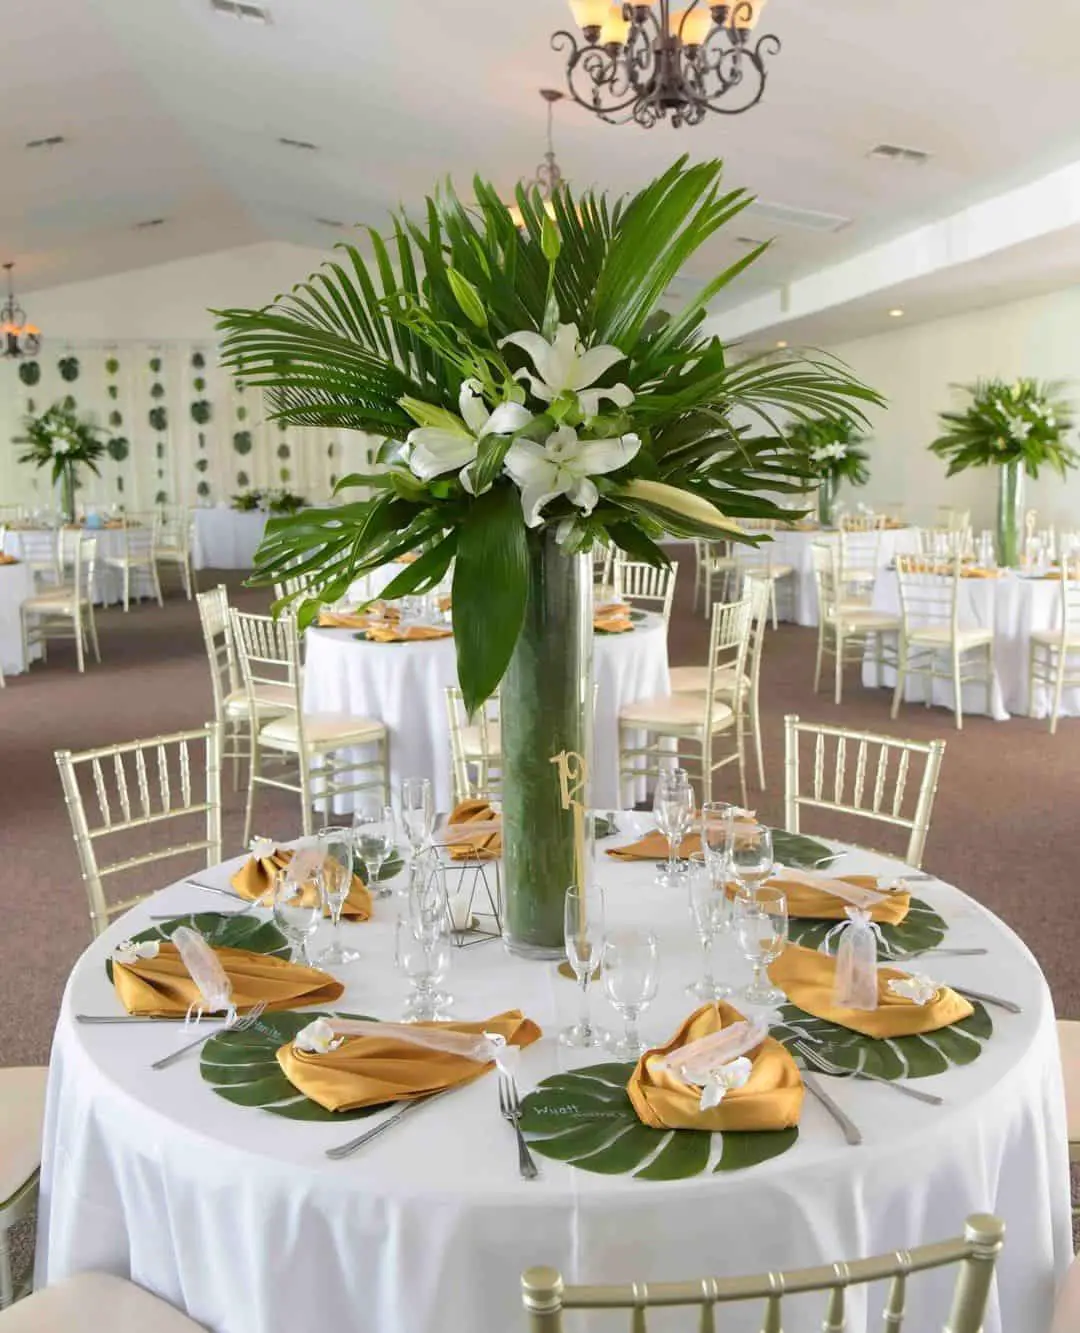 Sunset Gardens - Wedding Ceremony Packages & Prices, Las Vegas NV